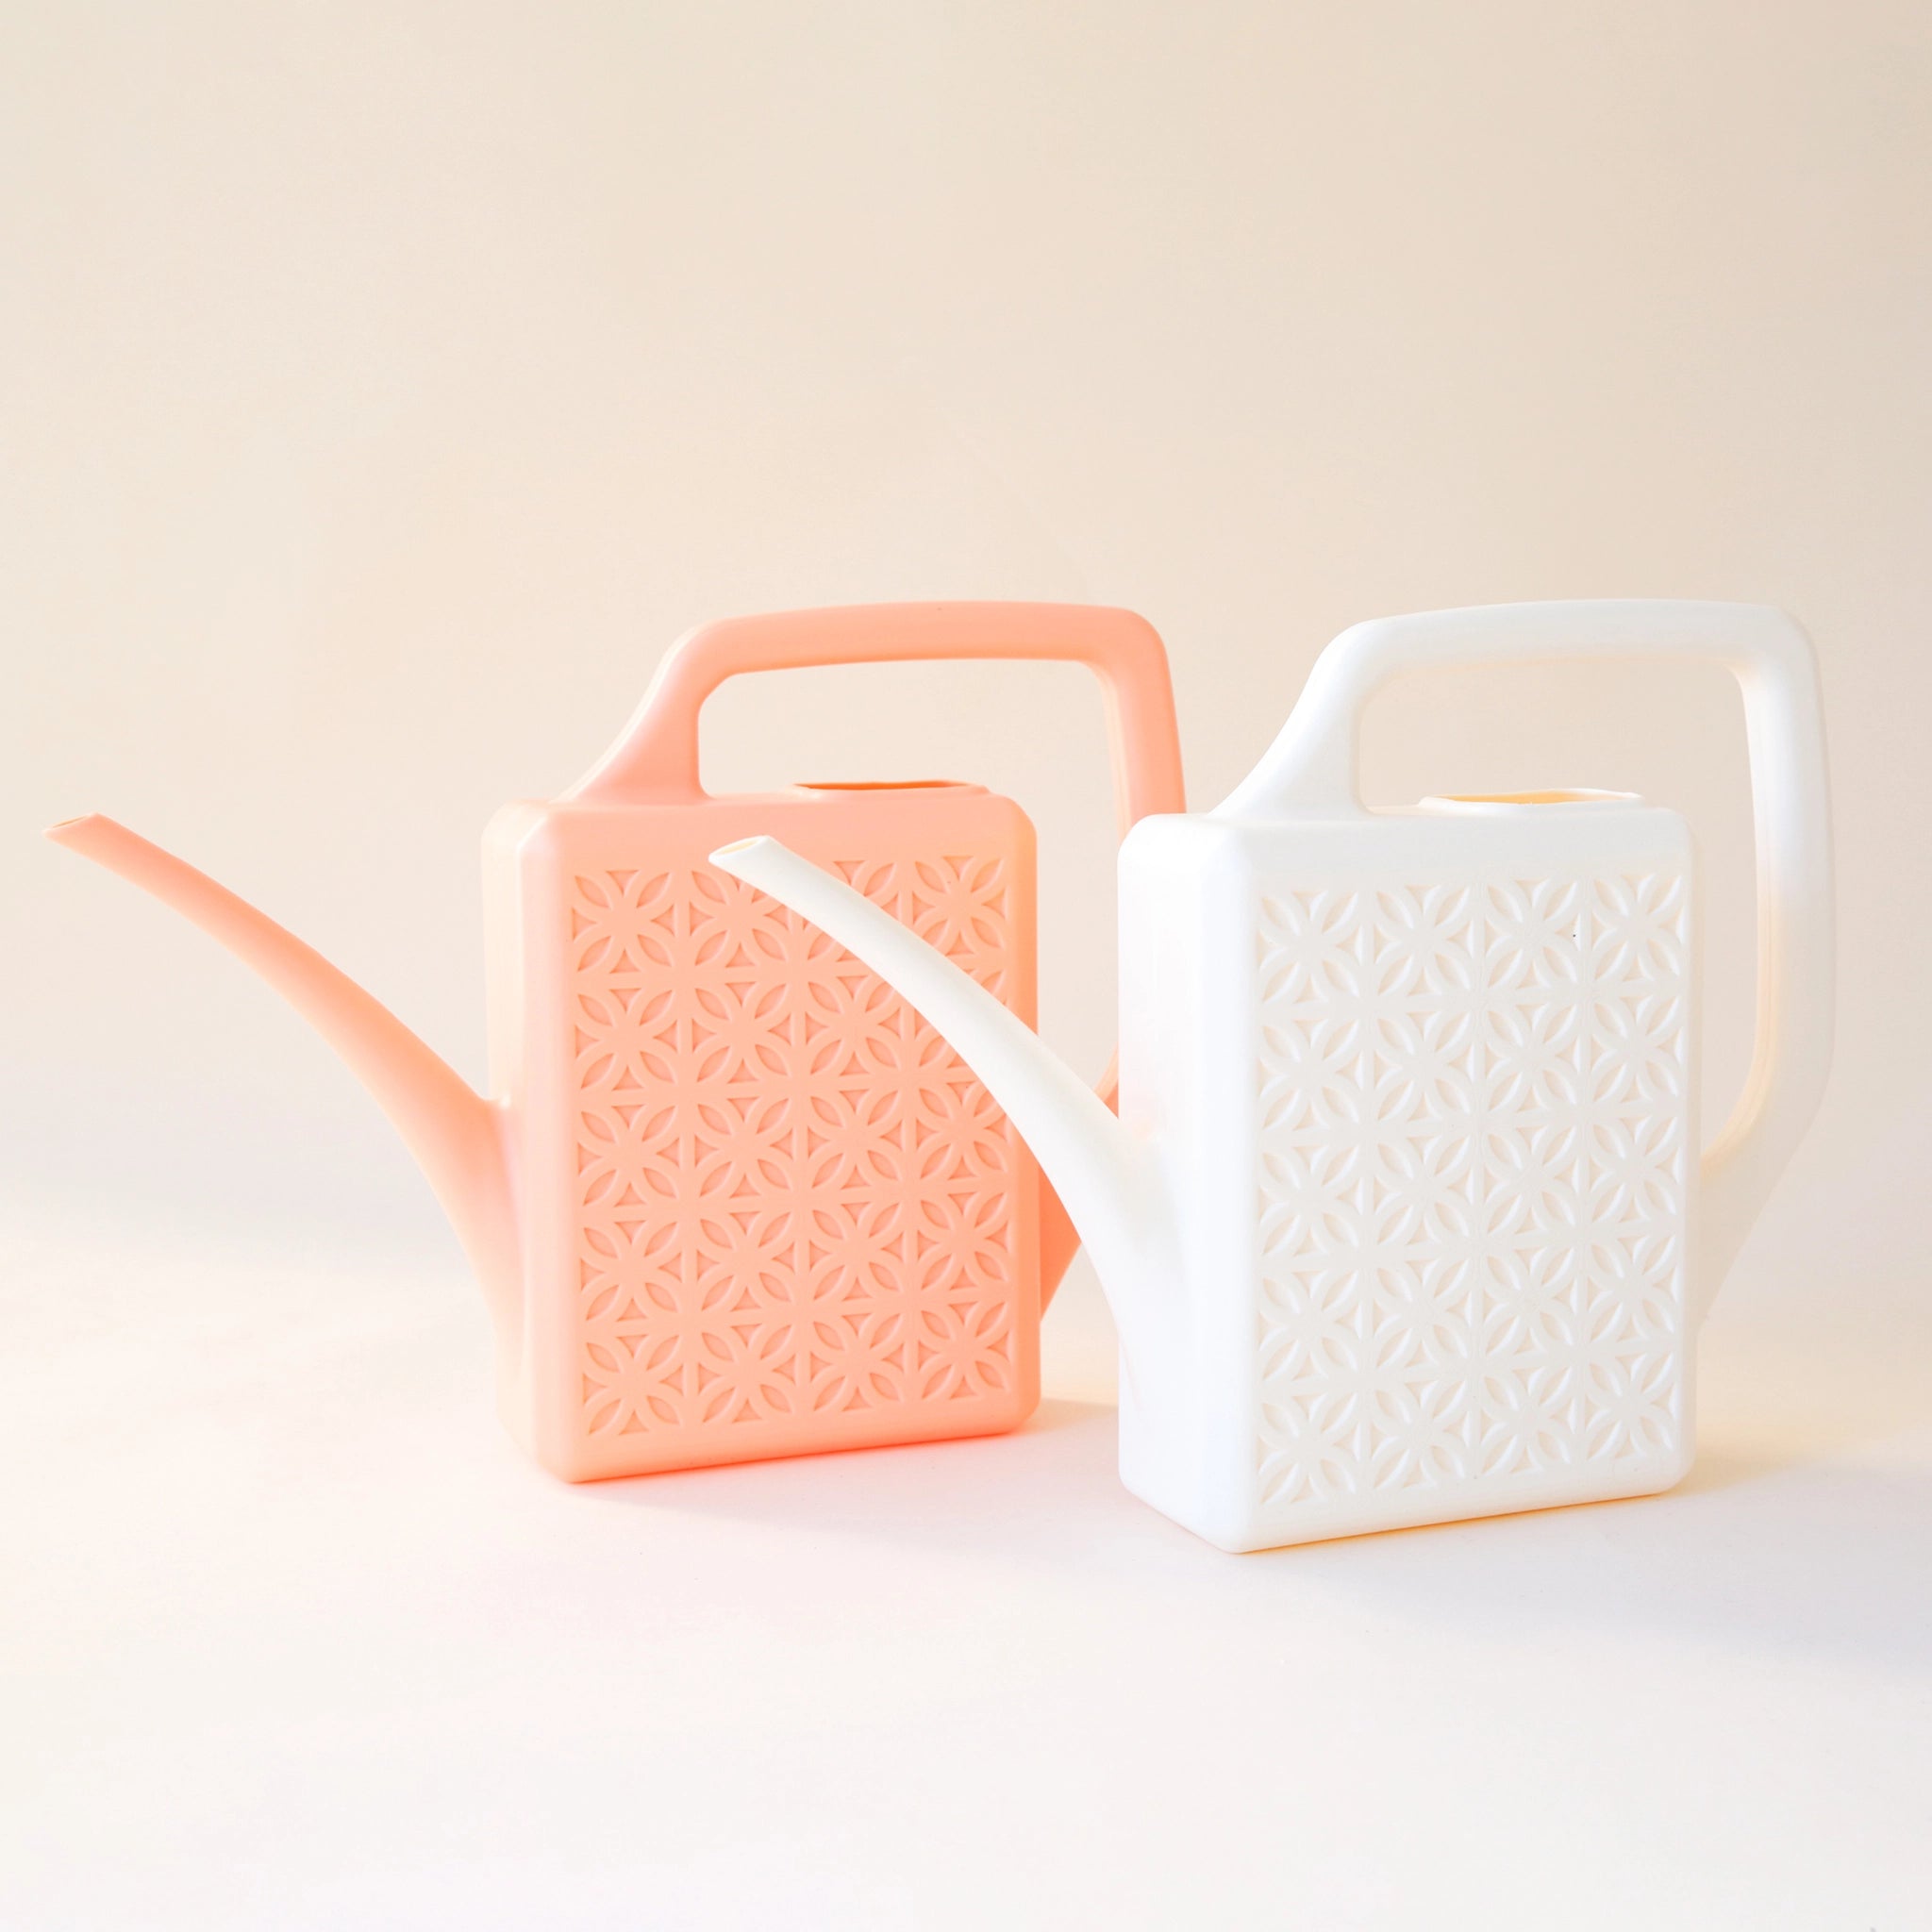 An ivory  and peach plastic watering cans sitting side by side with a narrow spout and square handle and a rectangle breeze block design on the sides.